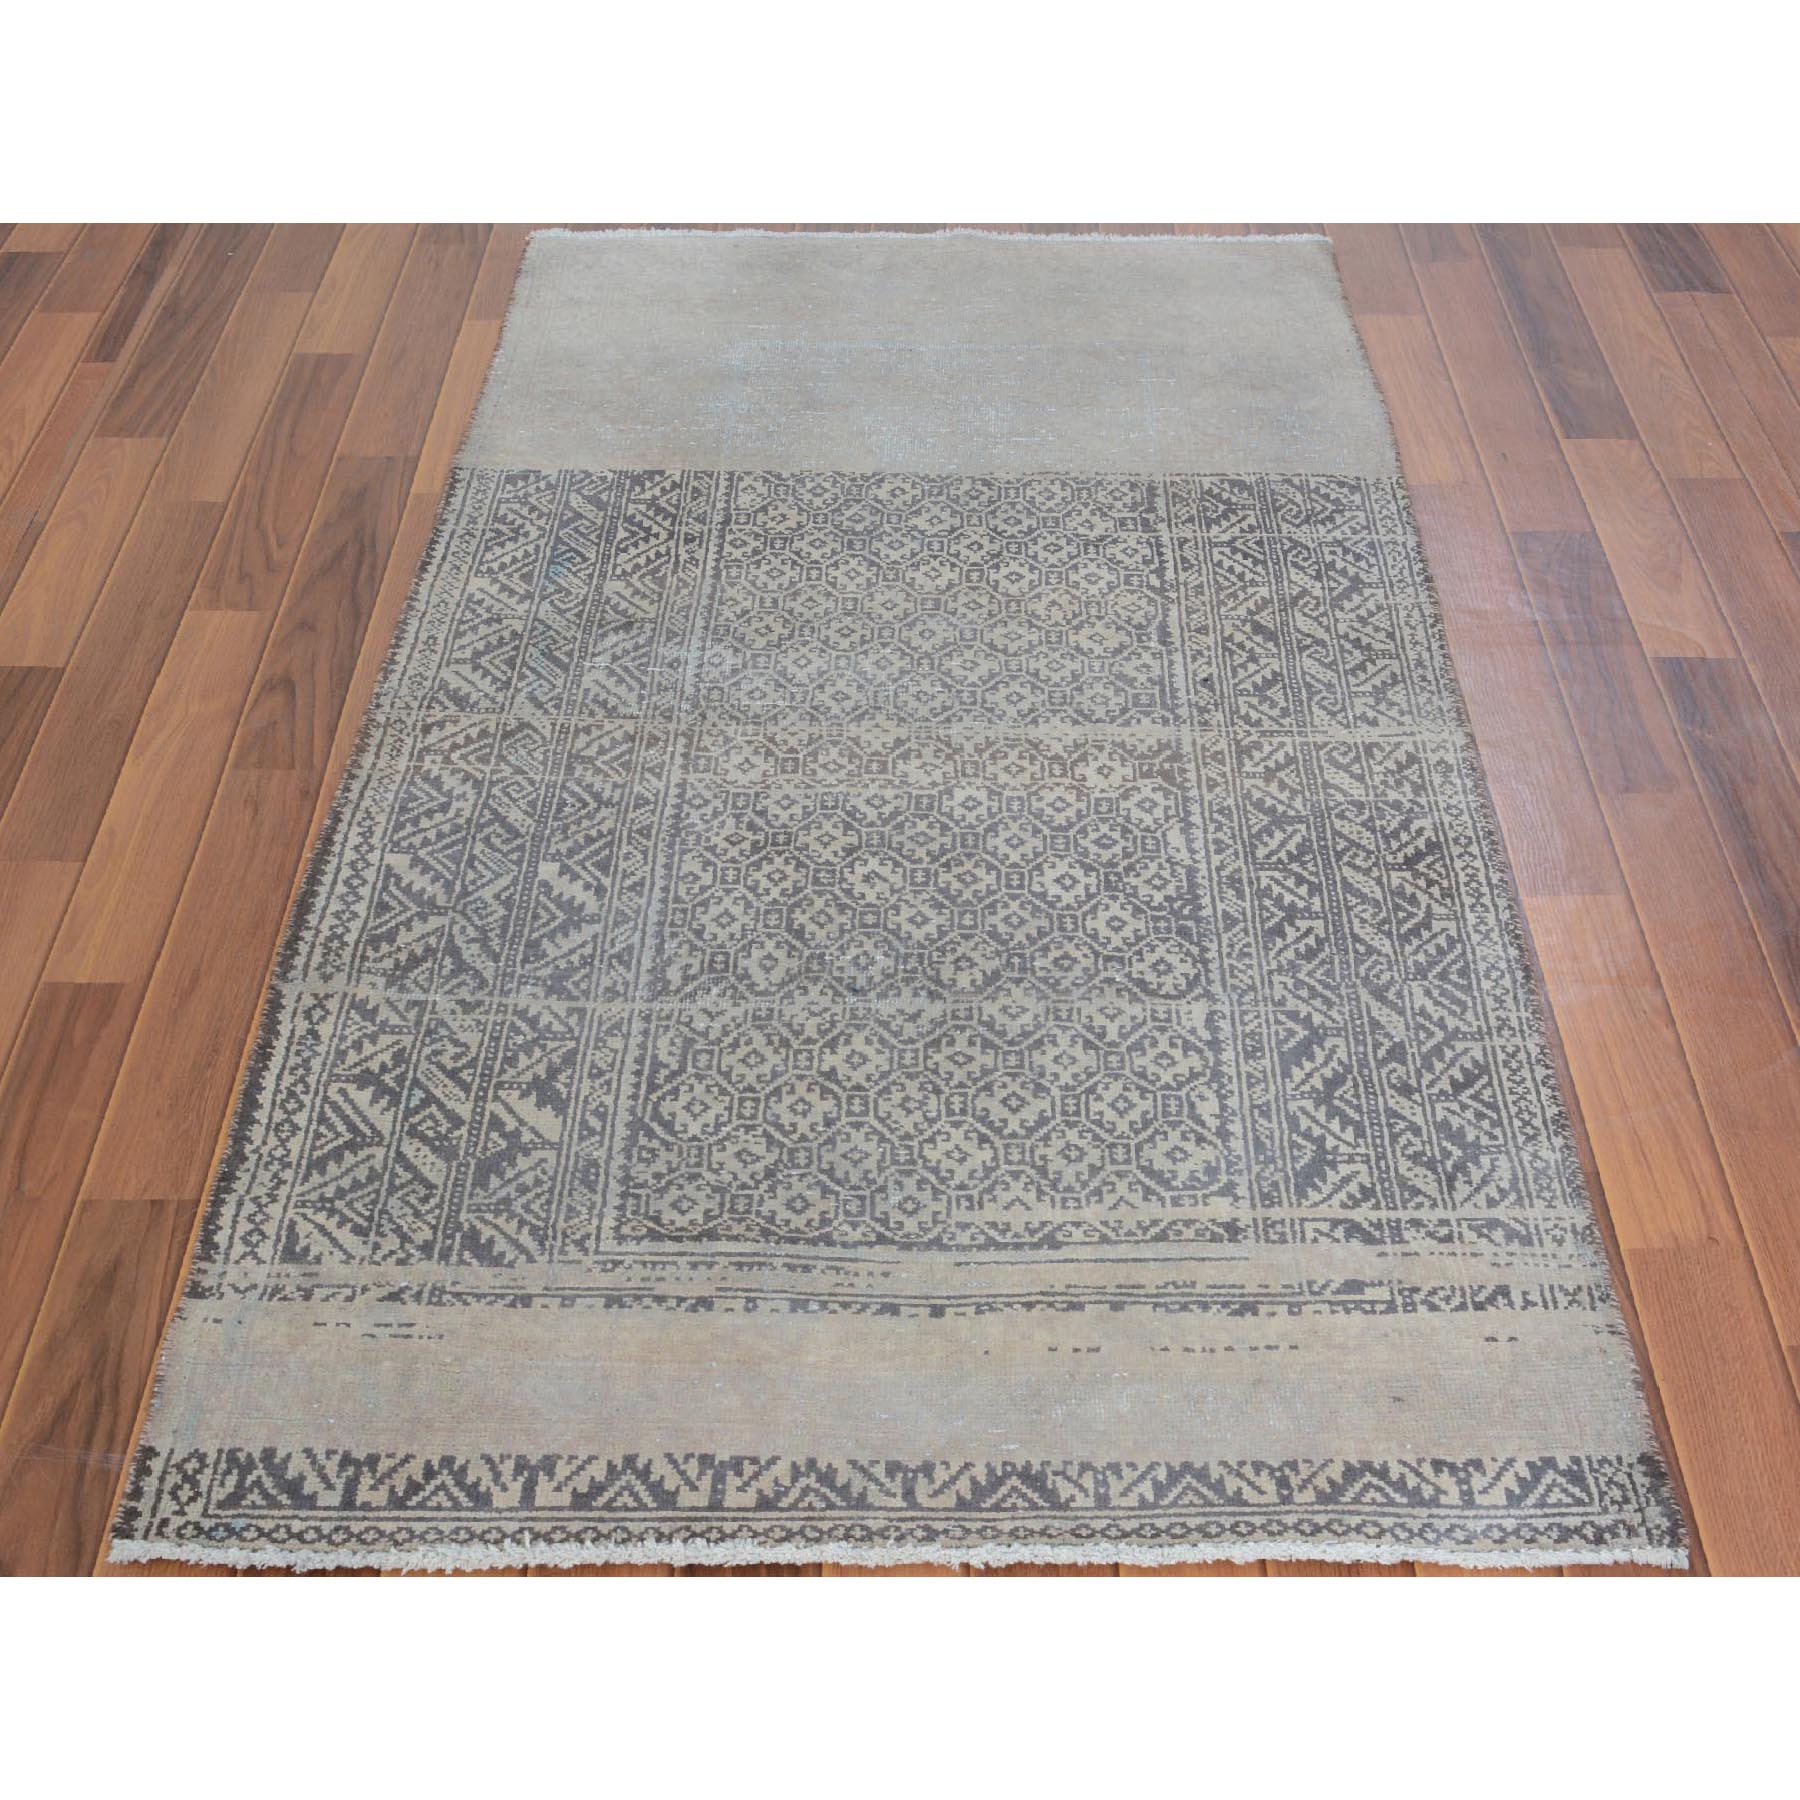 3-3 x6-4  Abrush Faded Out And Worn Down Hamadan Runner Pure wool Bohemian Rug 